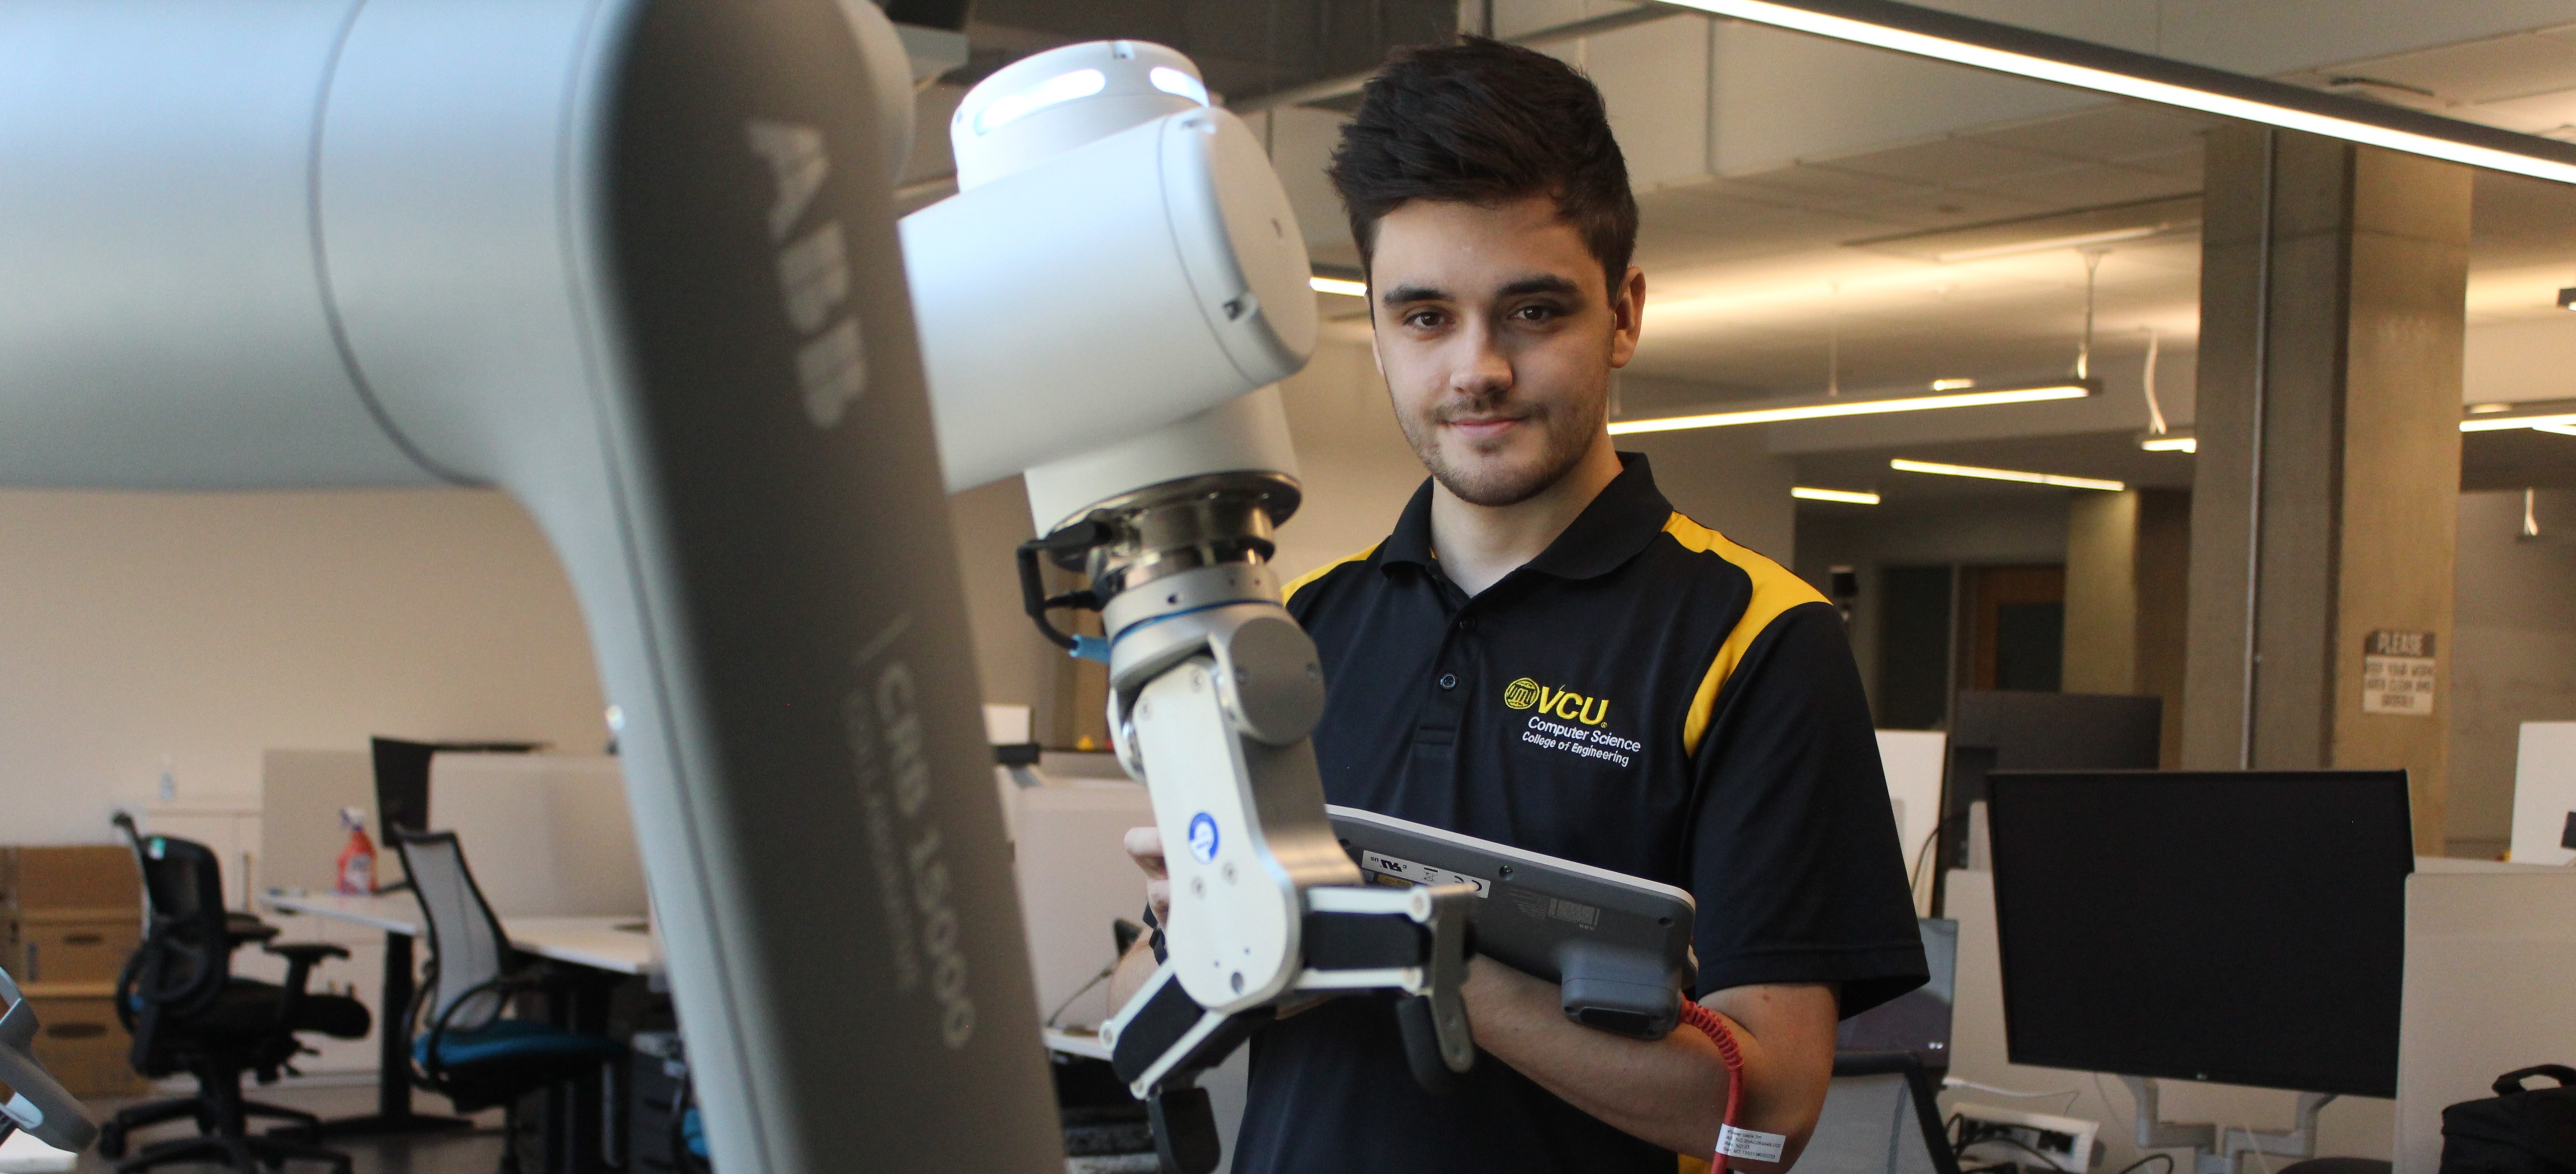 A student using a VCU shirt is manipulating a teaching pendant to control a one-armed collaborative robot.